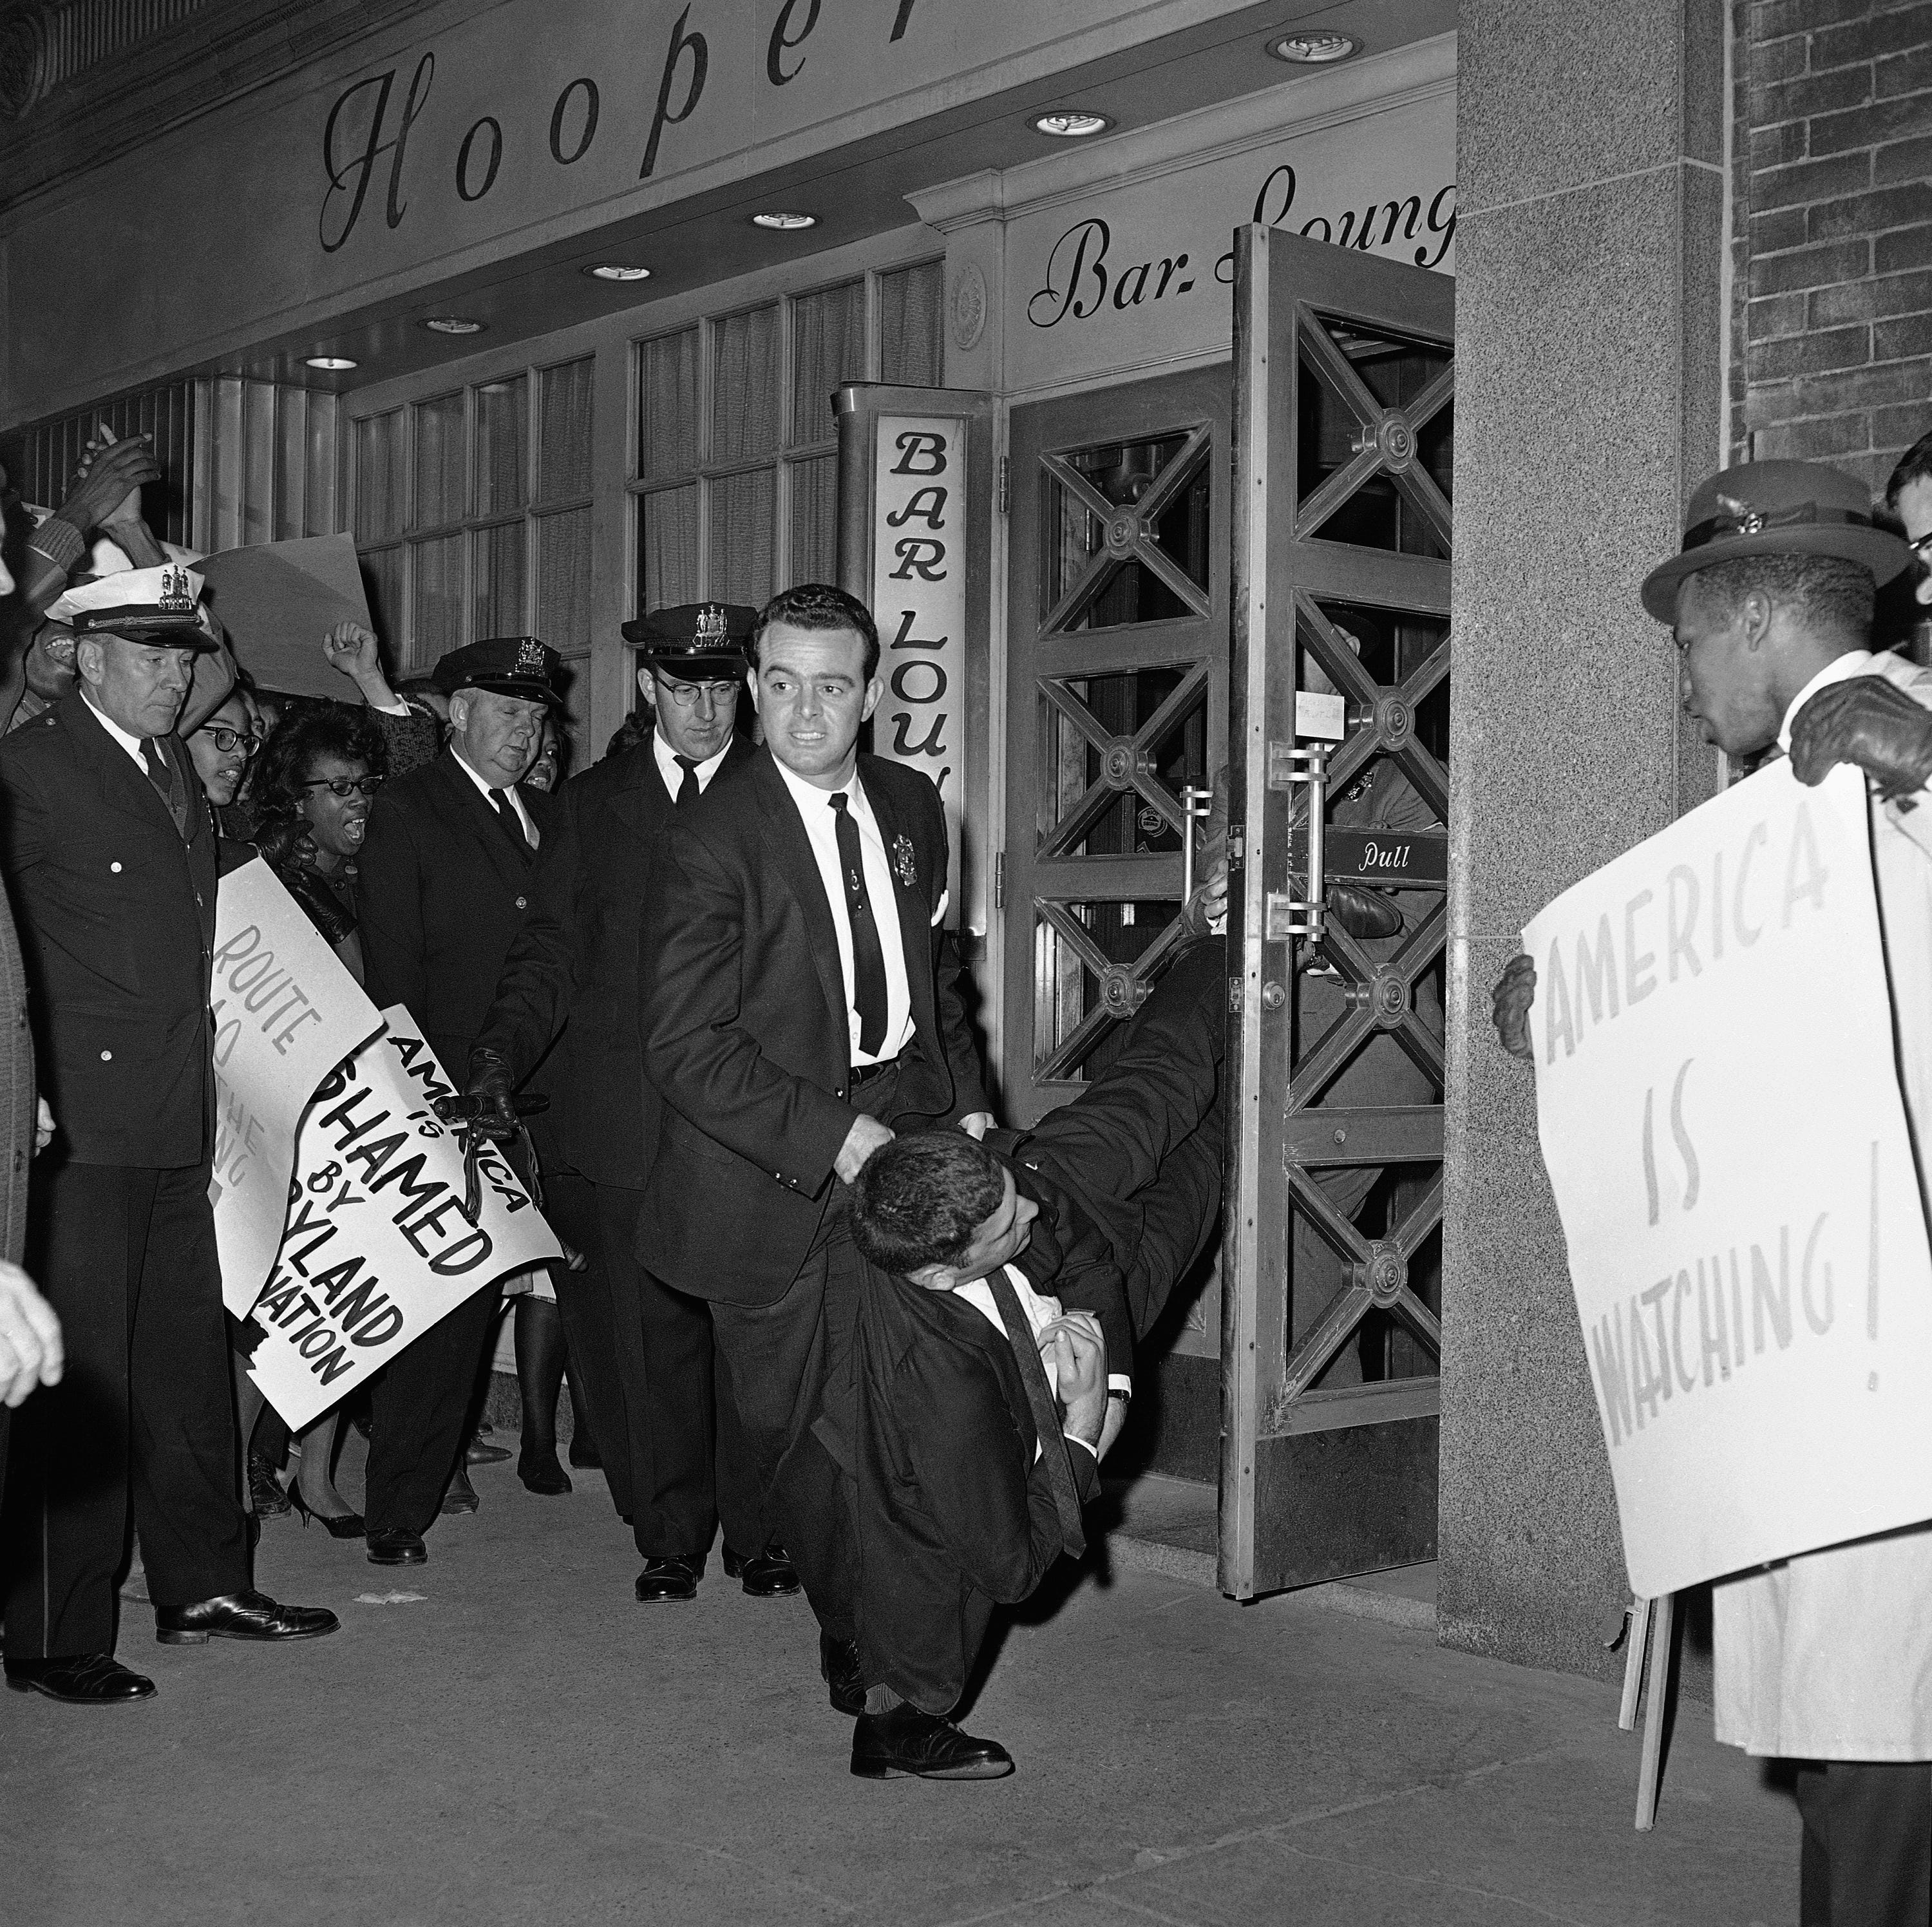 A Baltimore detective carries a sit-in demonstrator from Hooper's Restaurant on Nov. 11, 1961. The unidentified demonstrator was one of nine arrested and charged with violating Maryland's trespass ordinance. Several hundred people -- some from Philadelphia, Washington and New York -- took part in the demonstrations against segregation throughout Baltimore and in several nearby counties. More people were arrested as the day wore on.